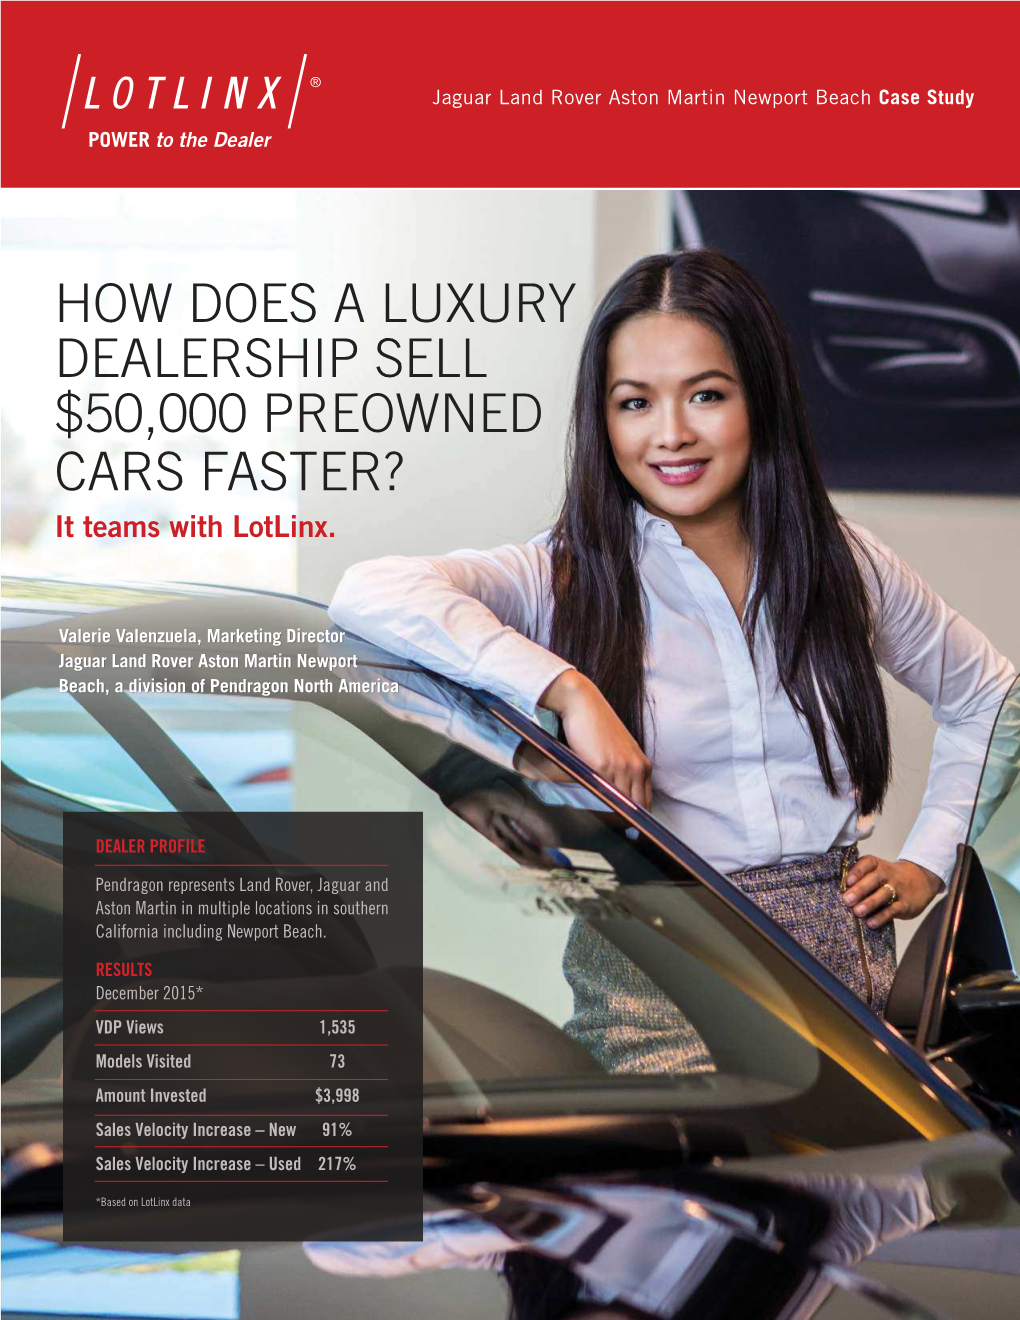 HOW DOES a LUXURY DEALERSHIP SELL $50,000 PREOWNED CARS FASTER? It Teams with Lotlinx